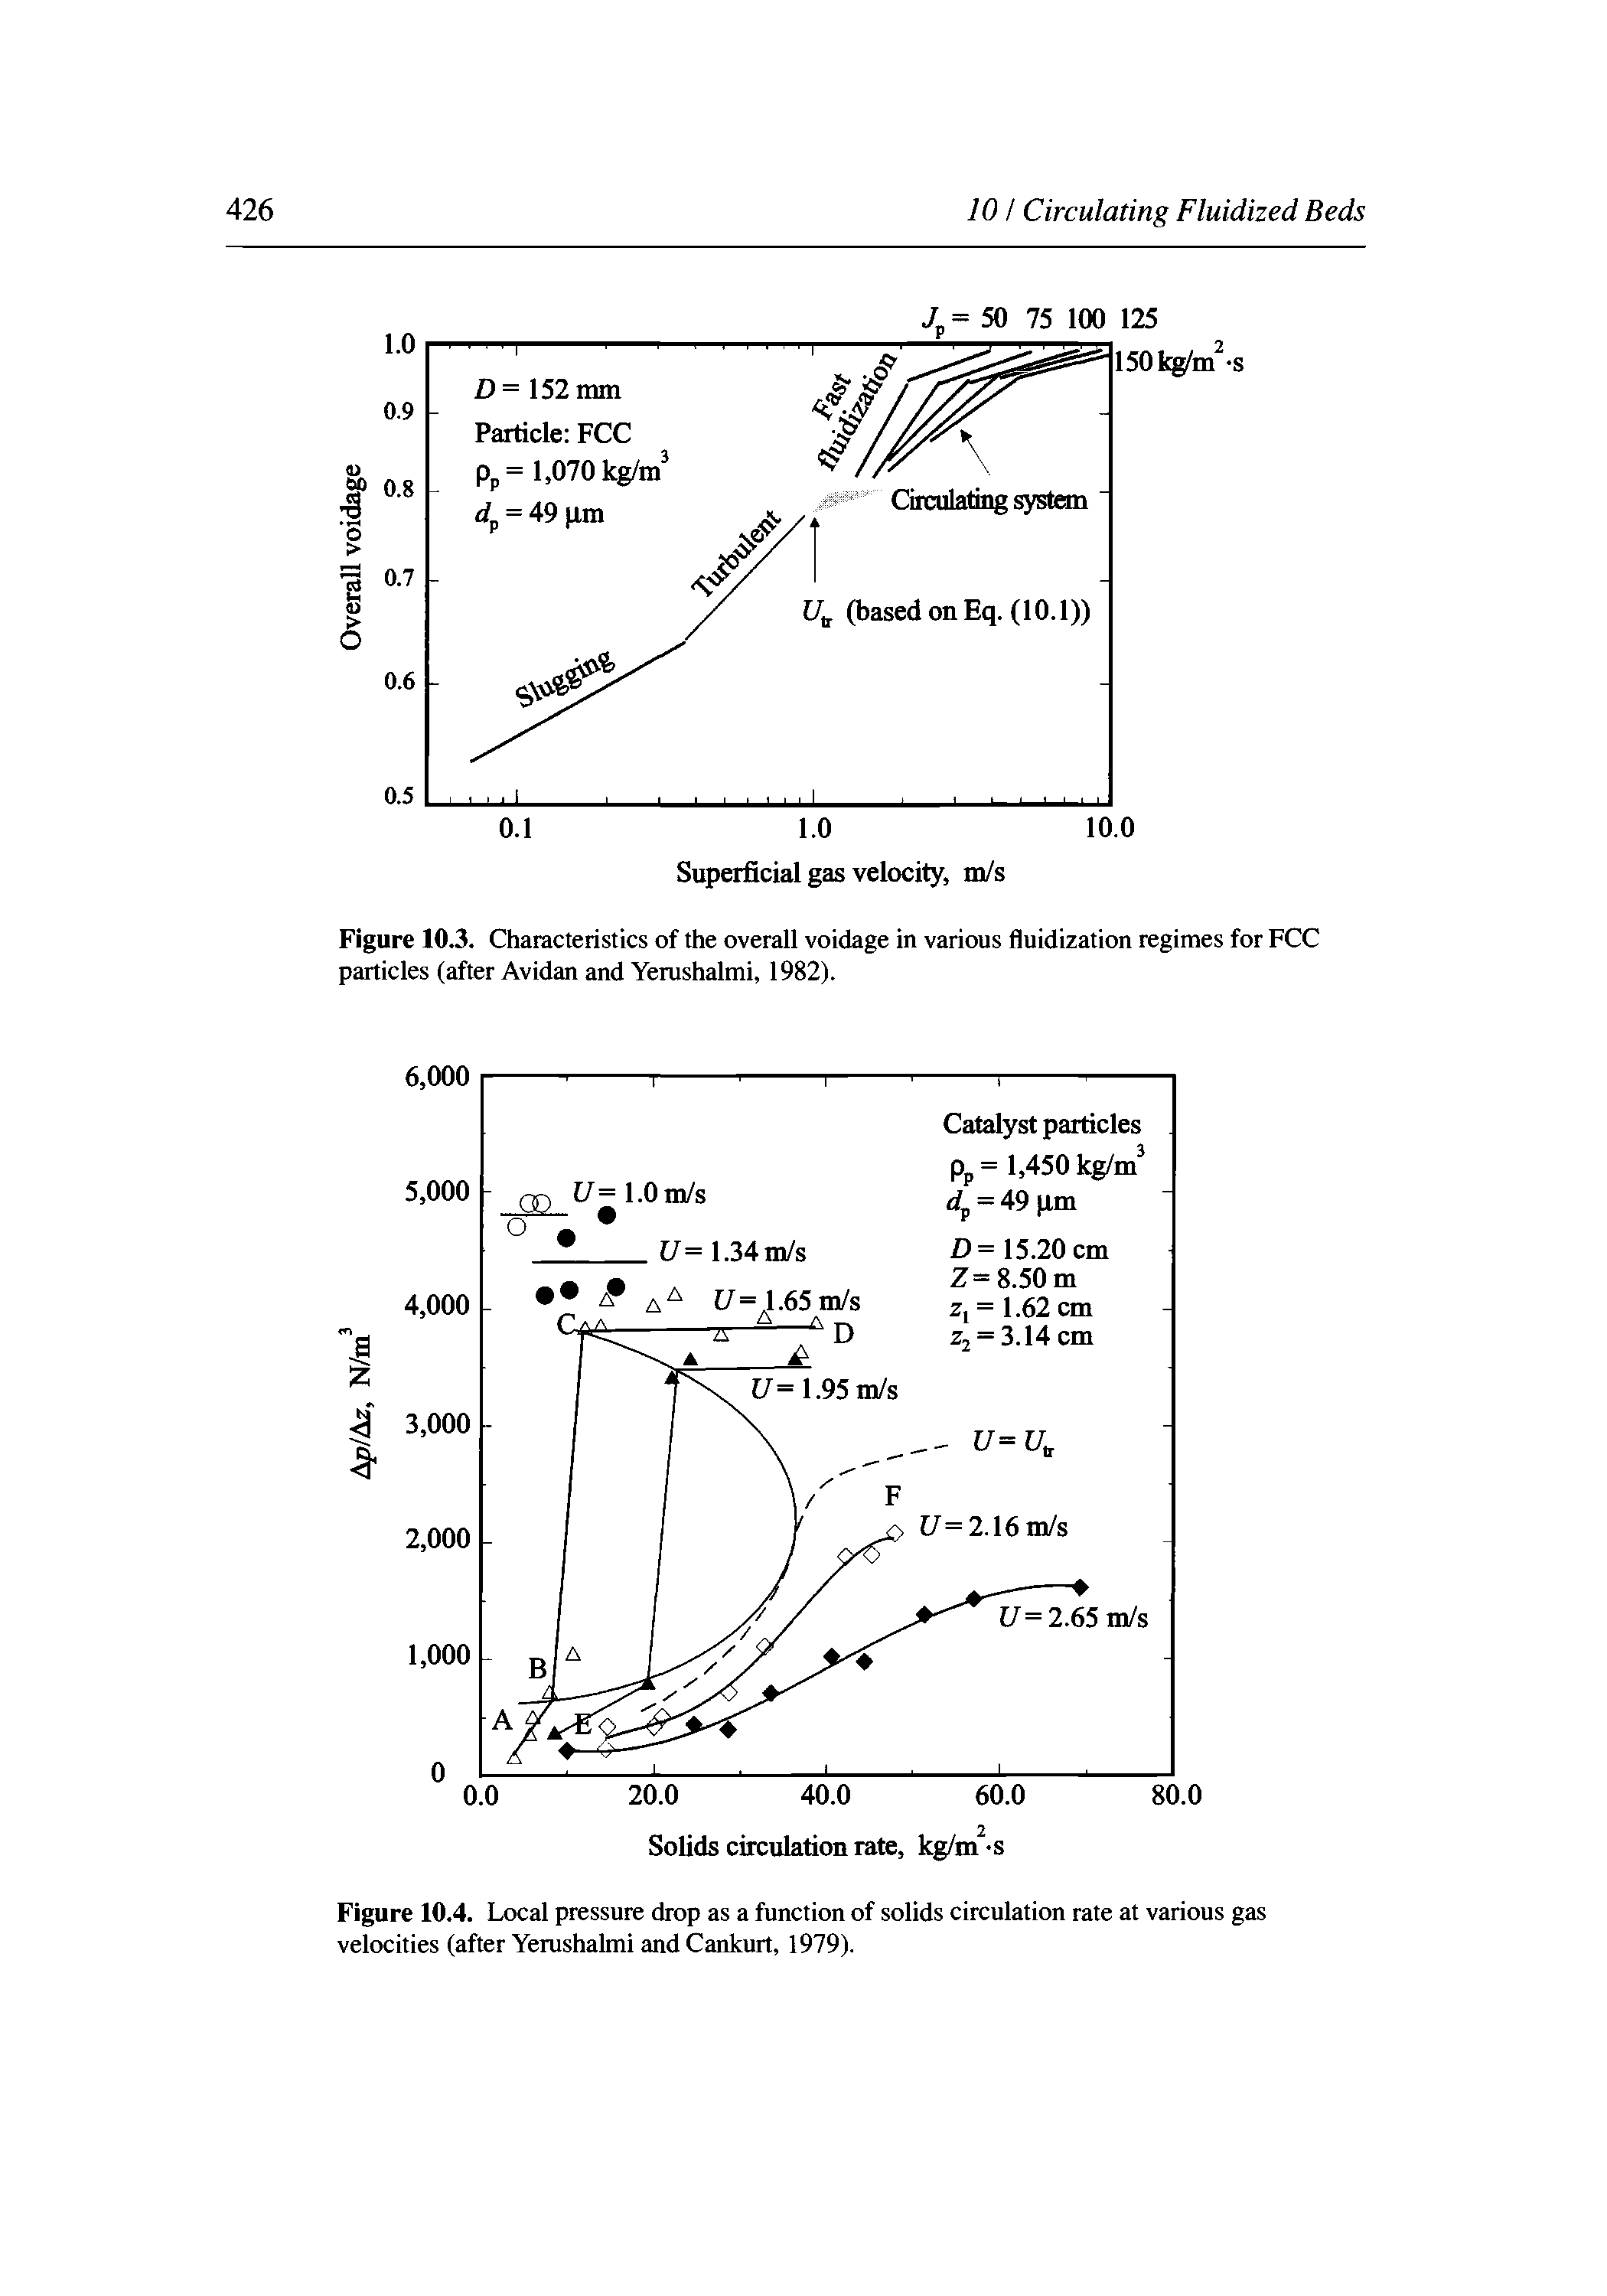 Figure 10.4. Local pressure drop as a function of solids circulation rate at various gas velocities (after Yerushalmi and Cankurt, 1979).